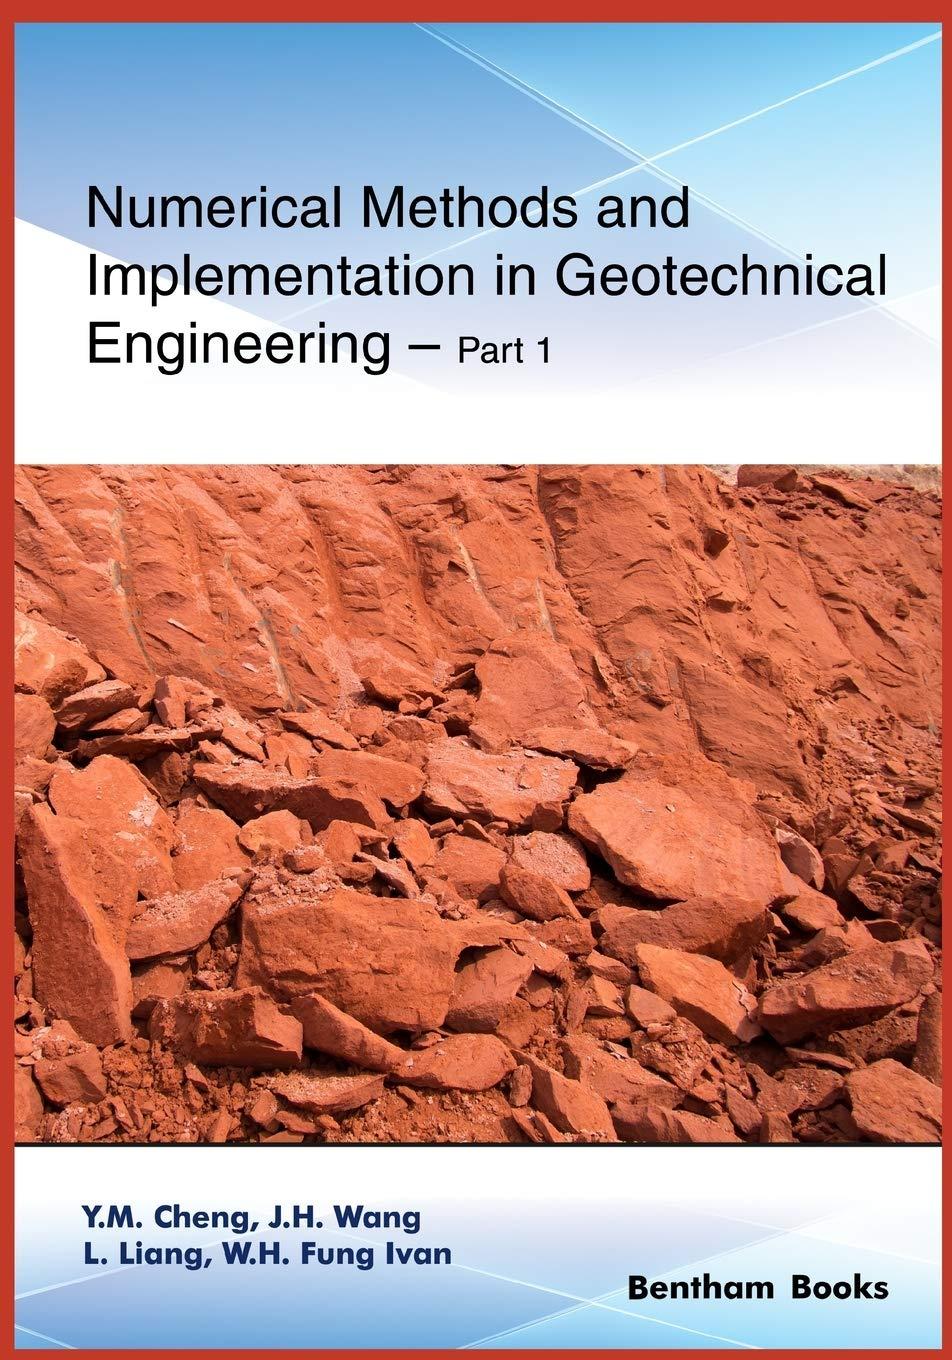 numerical methods and implementation in geotechnical engineering part 1 1st edition y.m. cheng, j.h. wang, l.